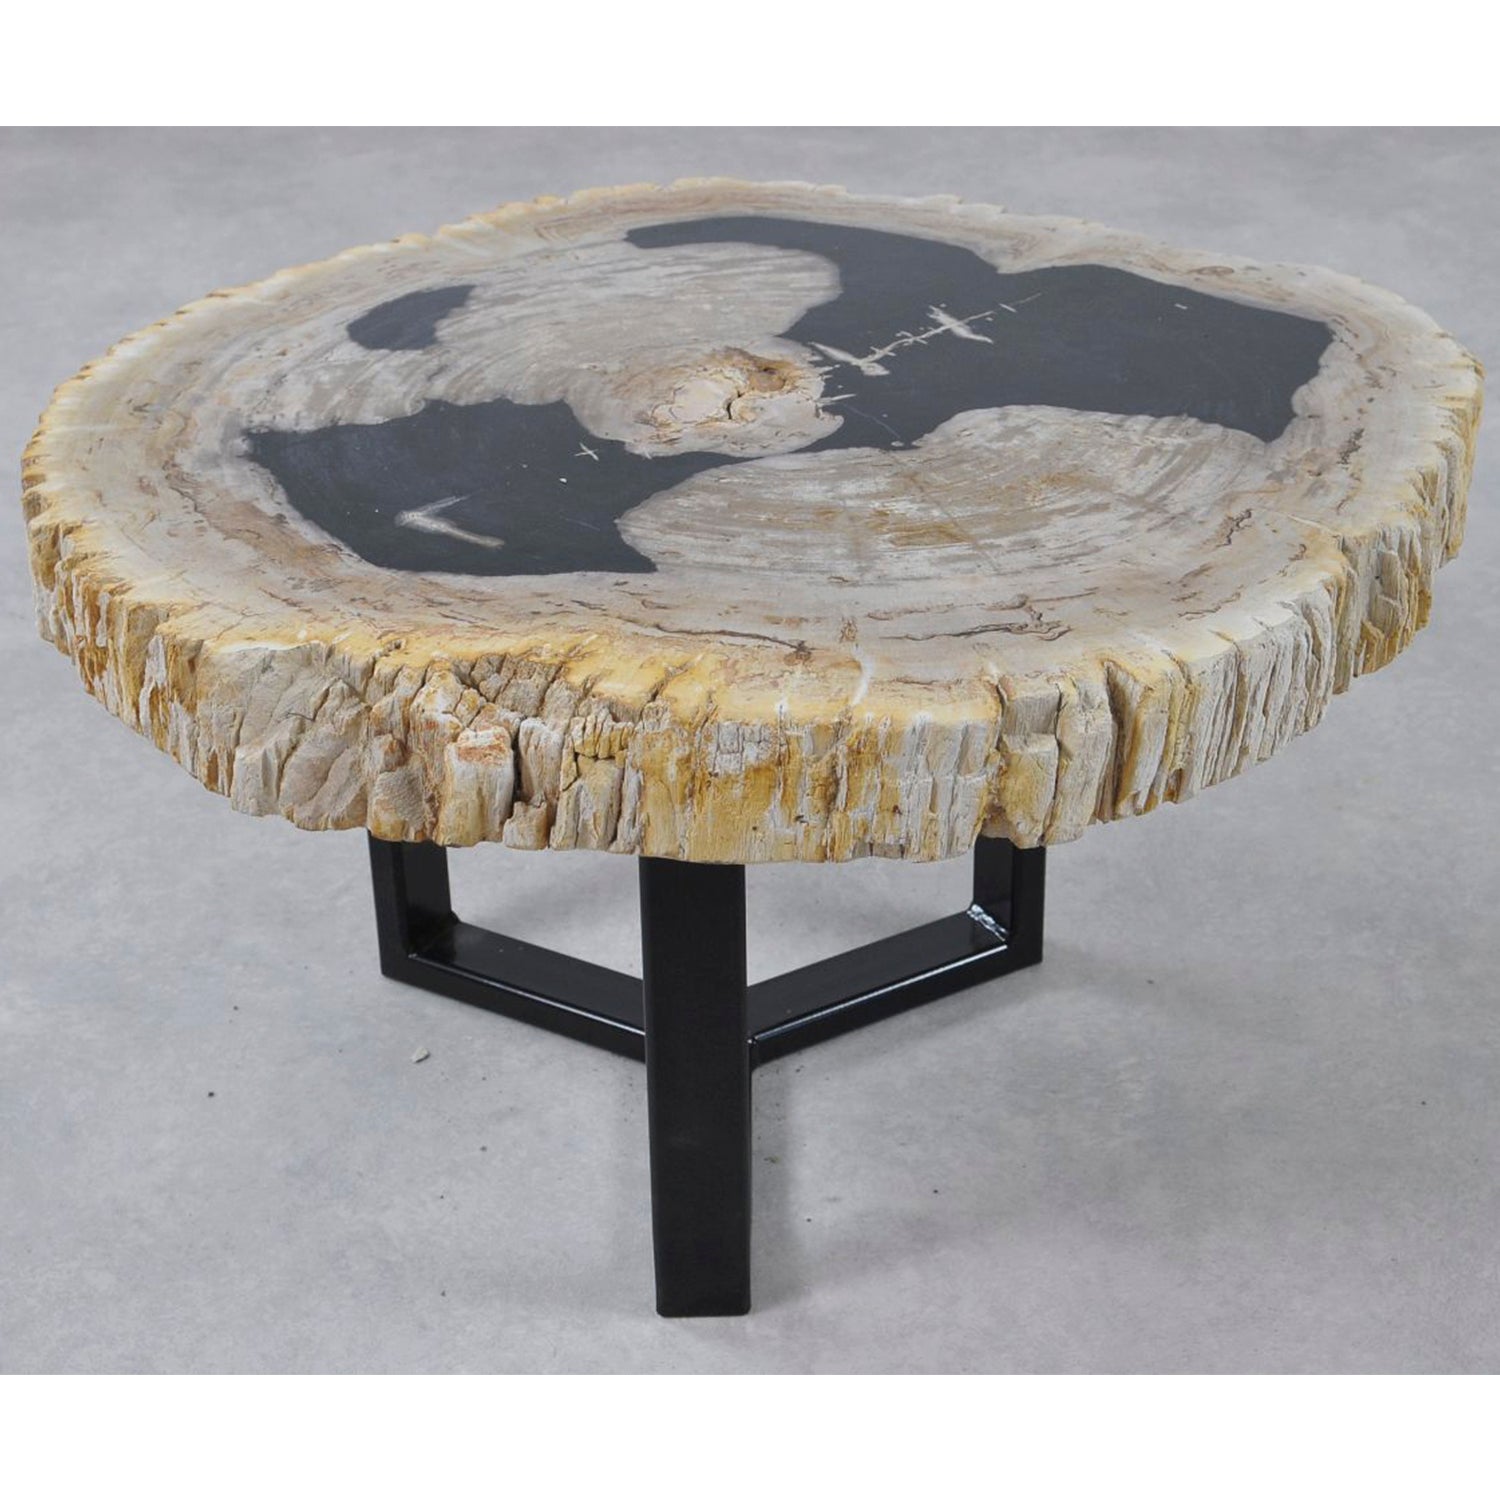 NATURAL WOOD FOSSIL TABLE